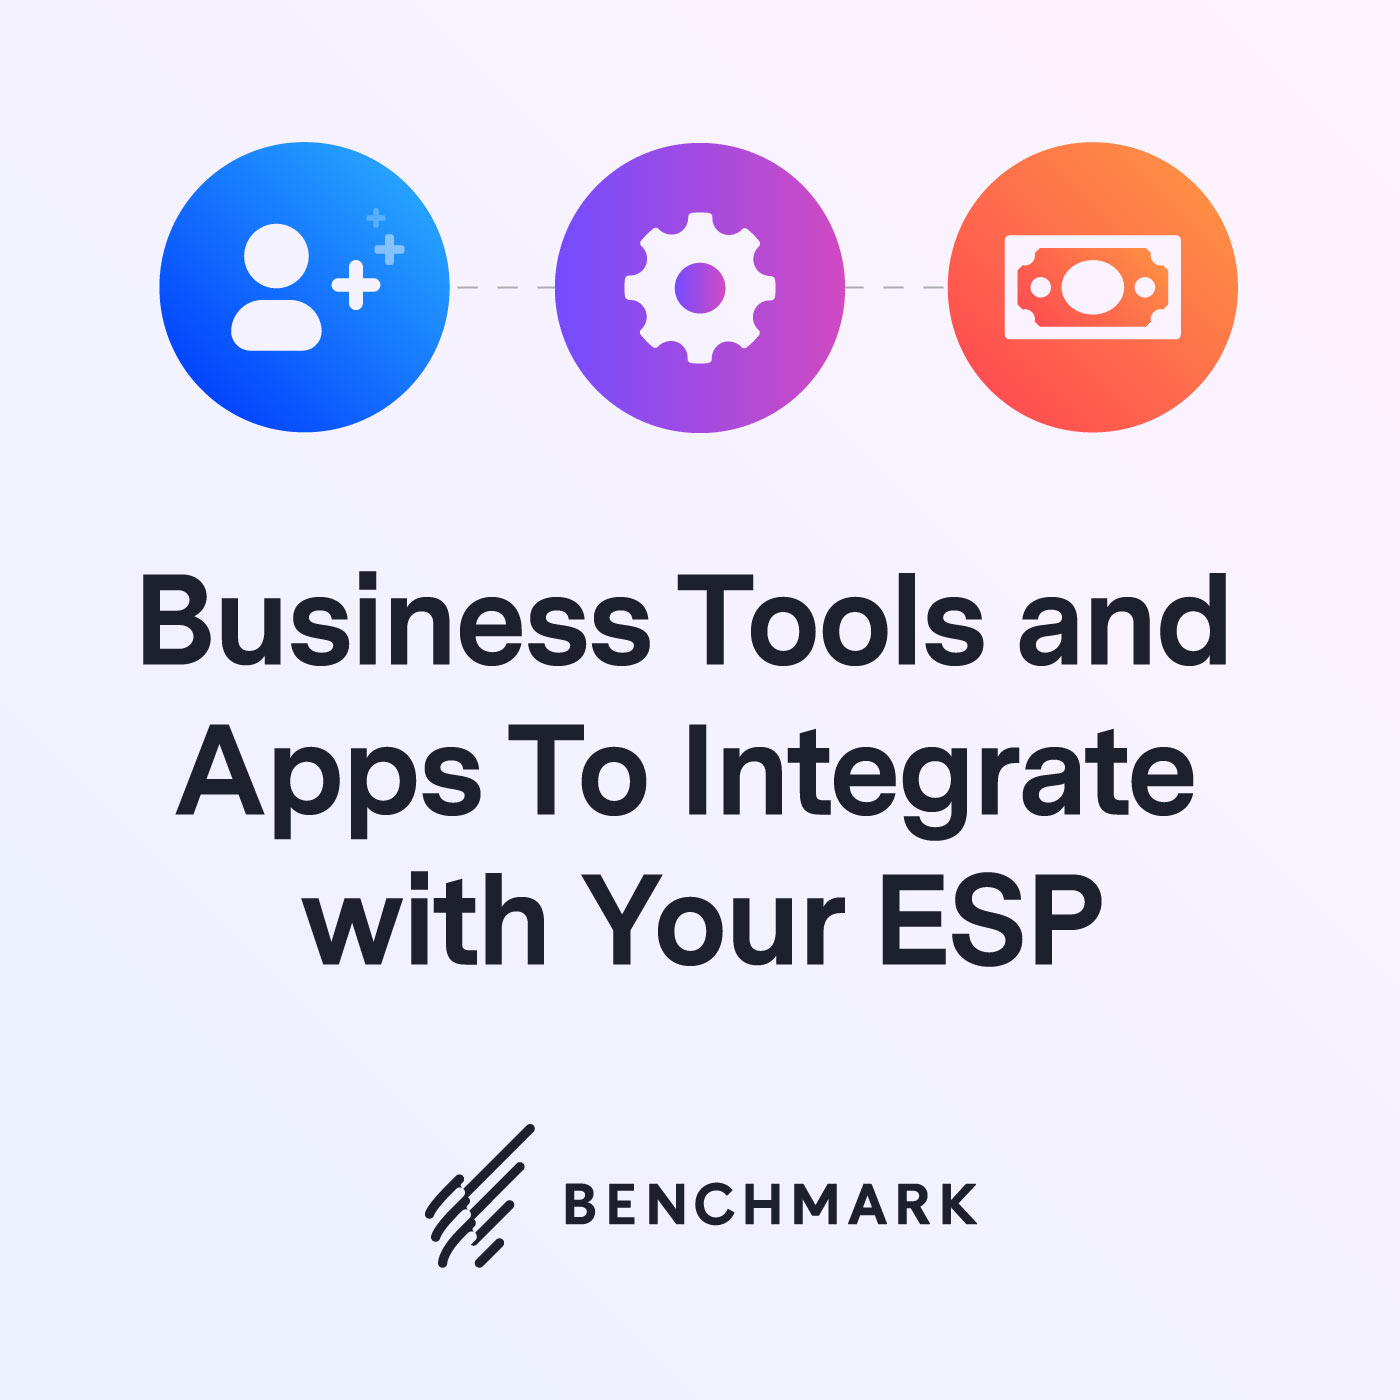 Top Business Tools and Apps To Integrate with Your ESP